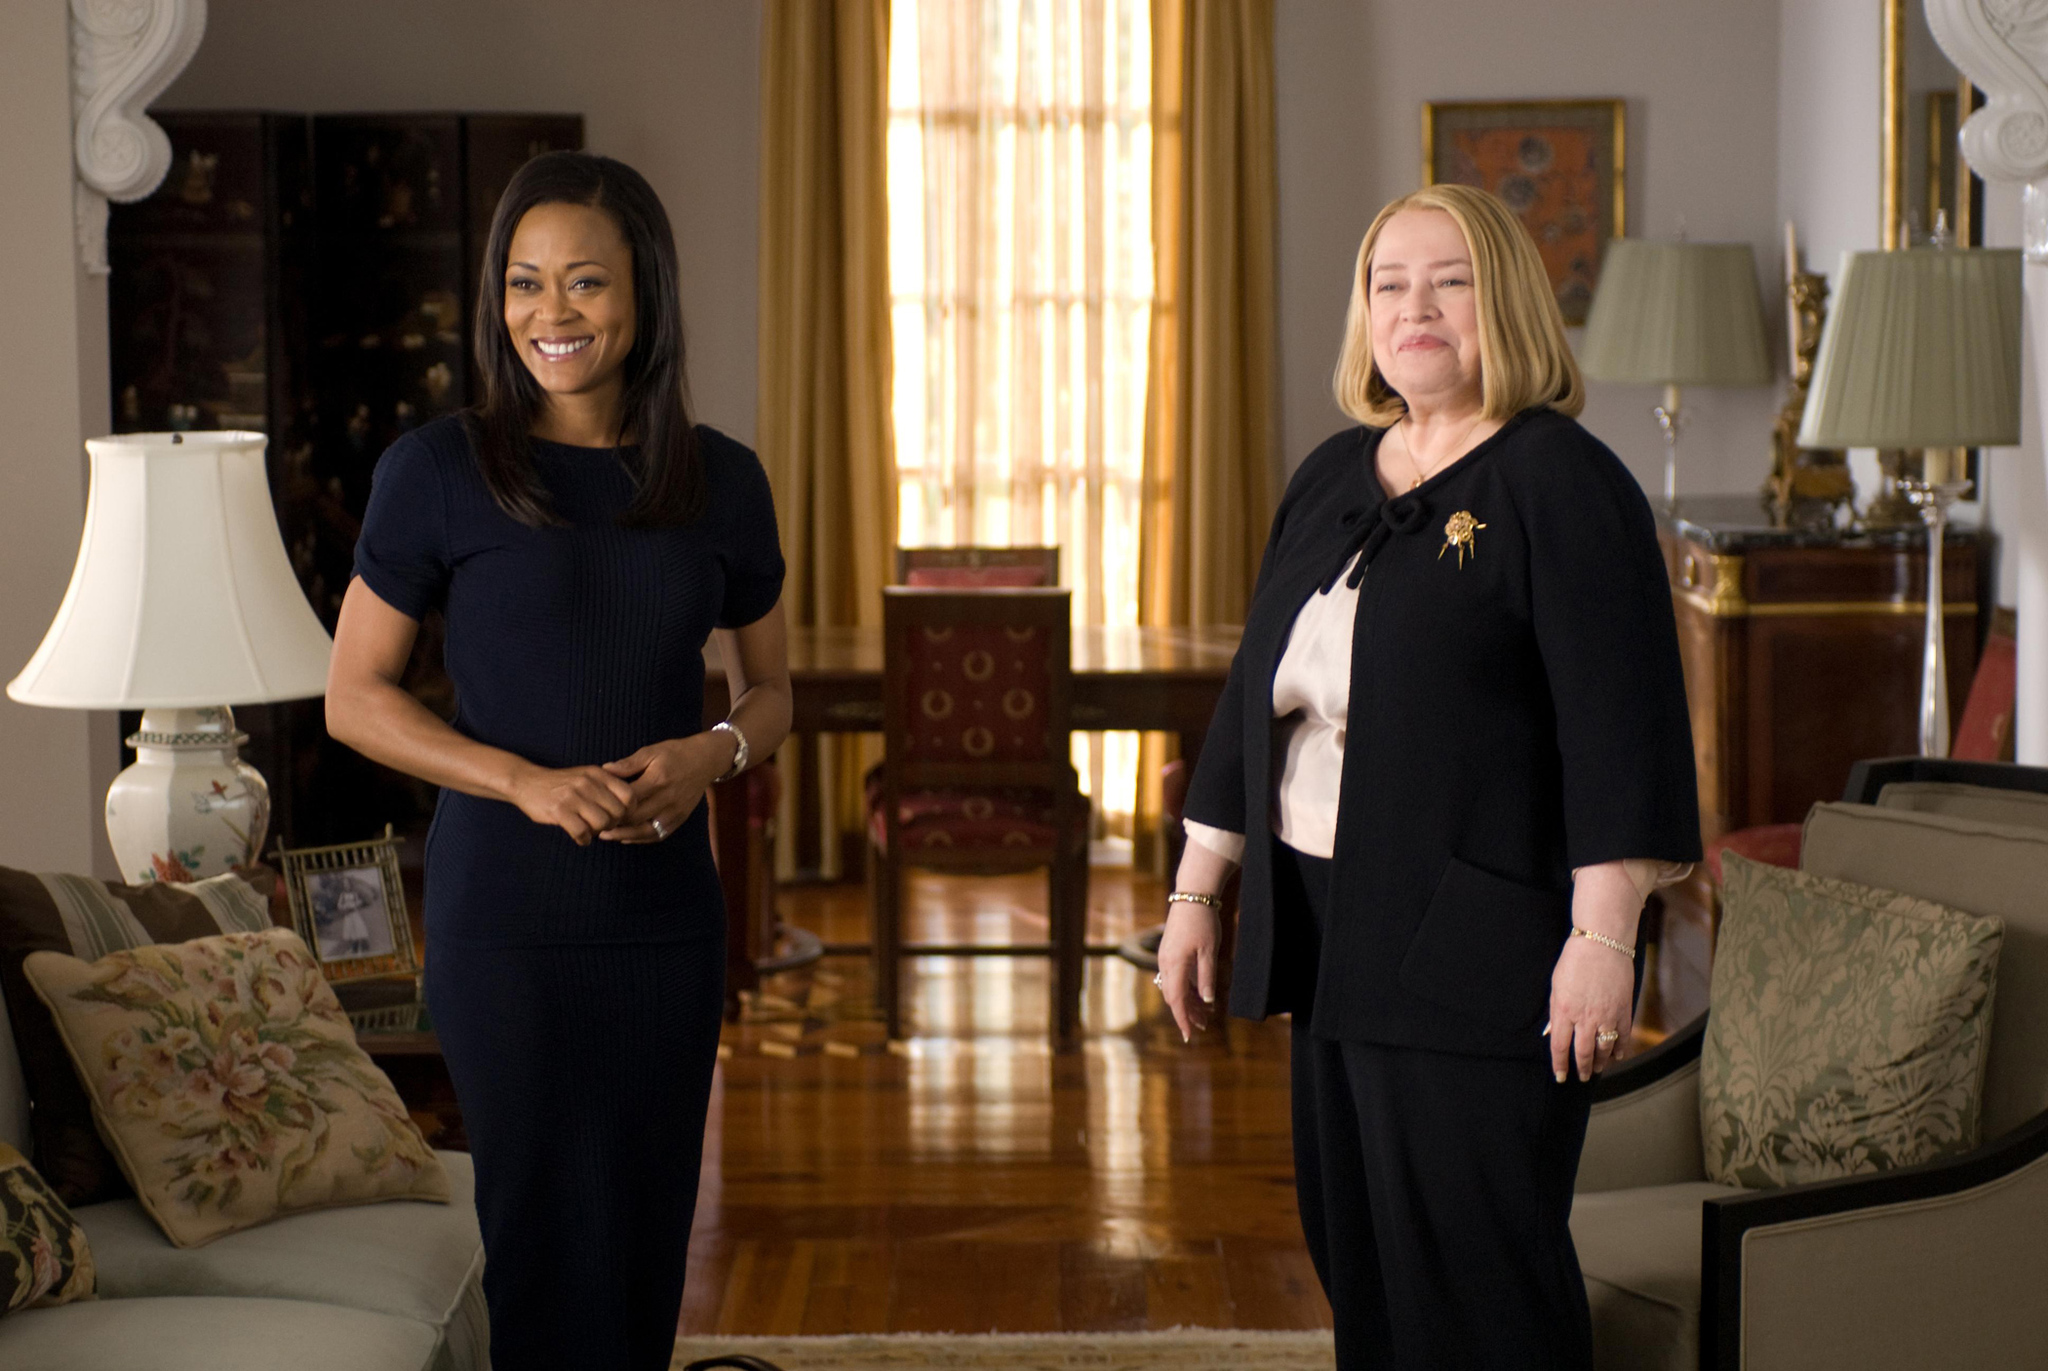 Still of Kathy Bates and Robin Givens in The Family That Preys (2008)